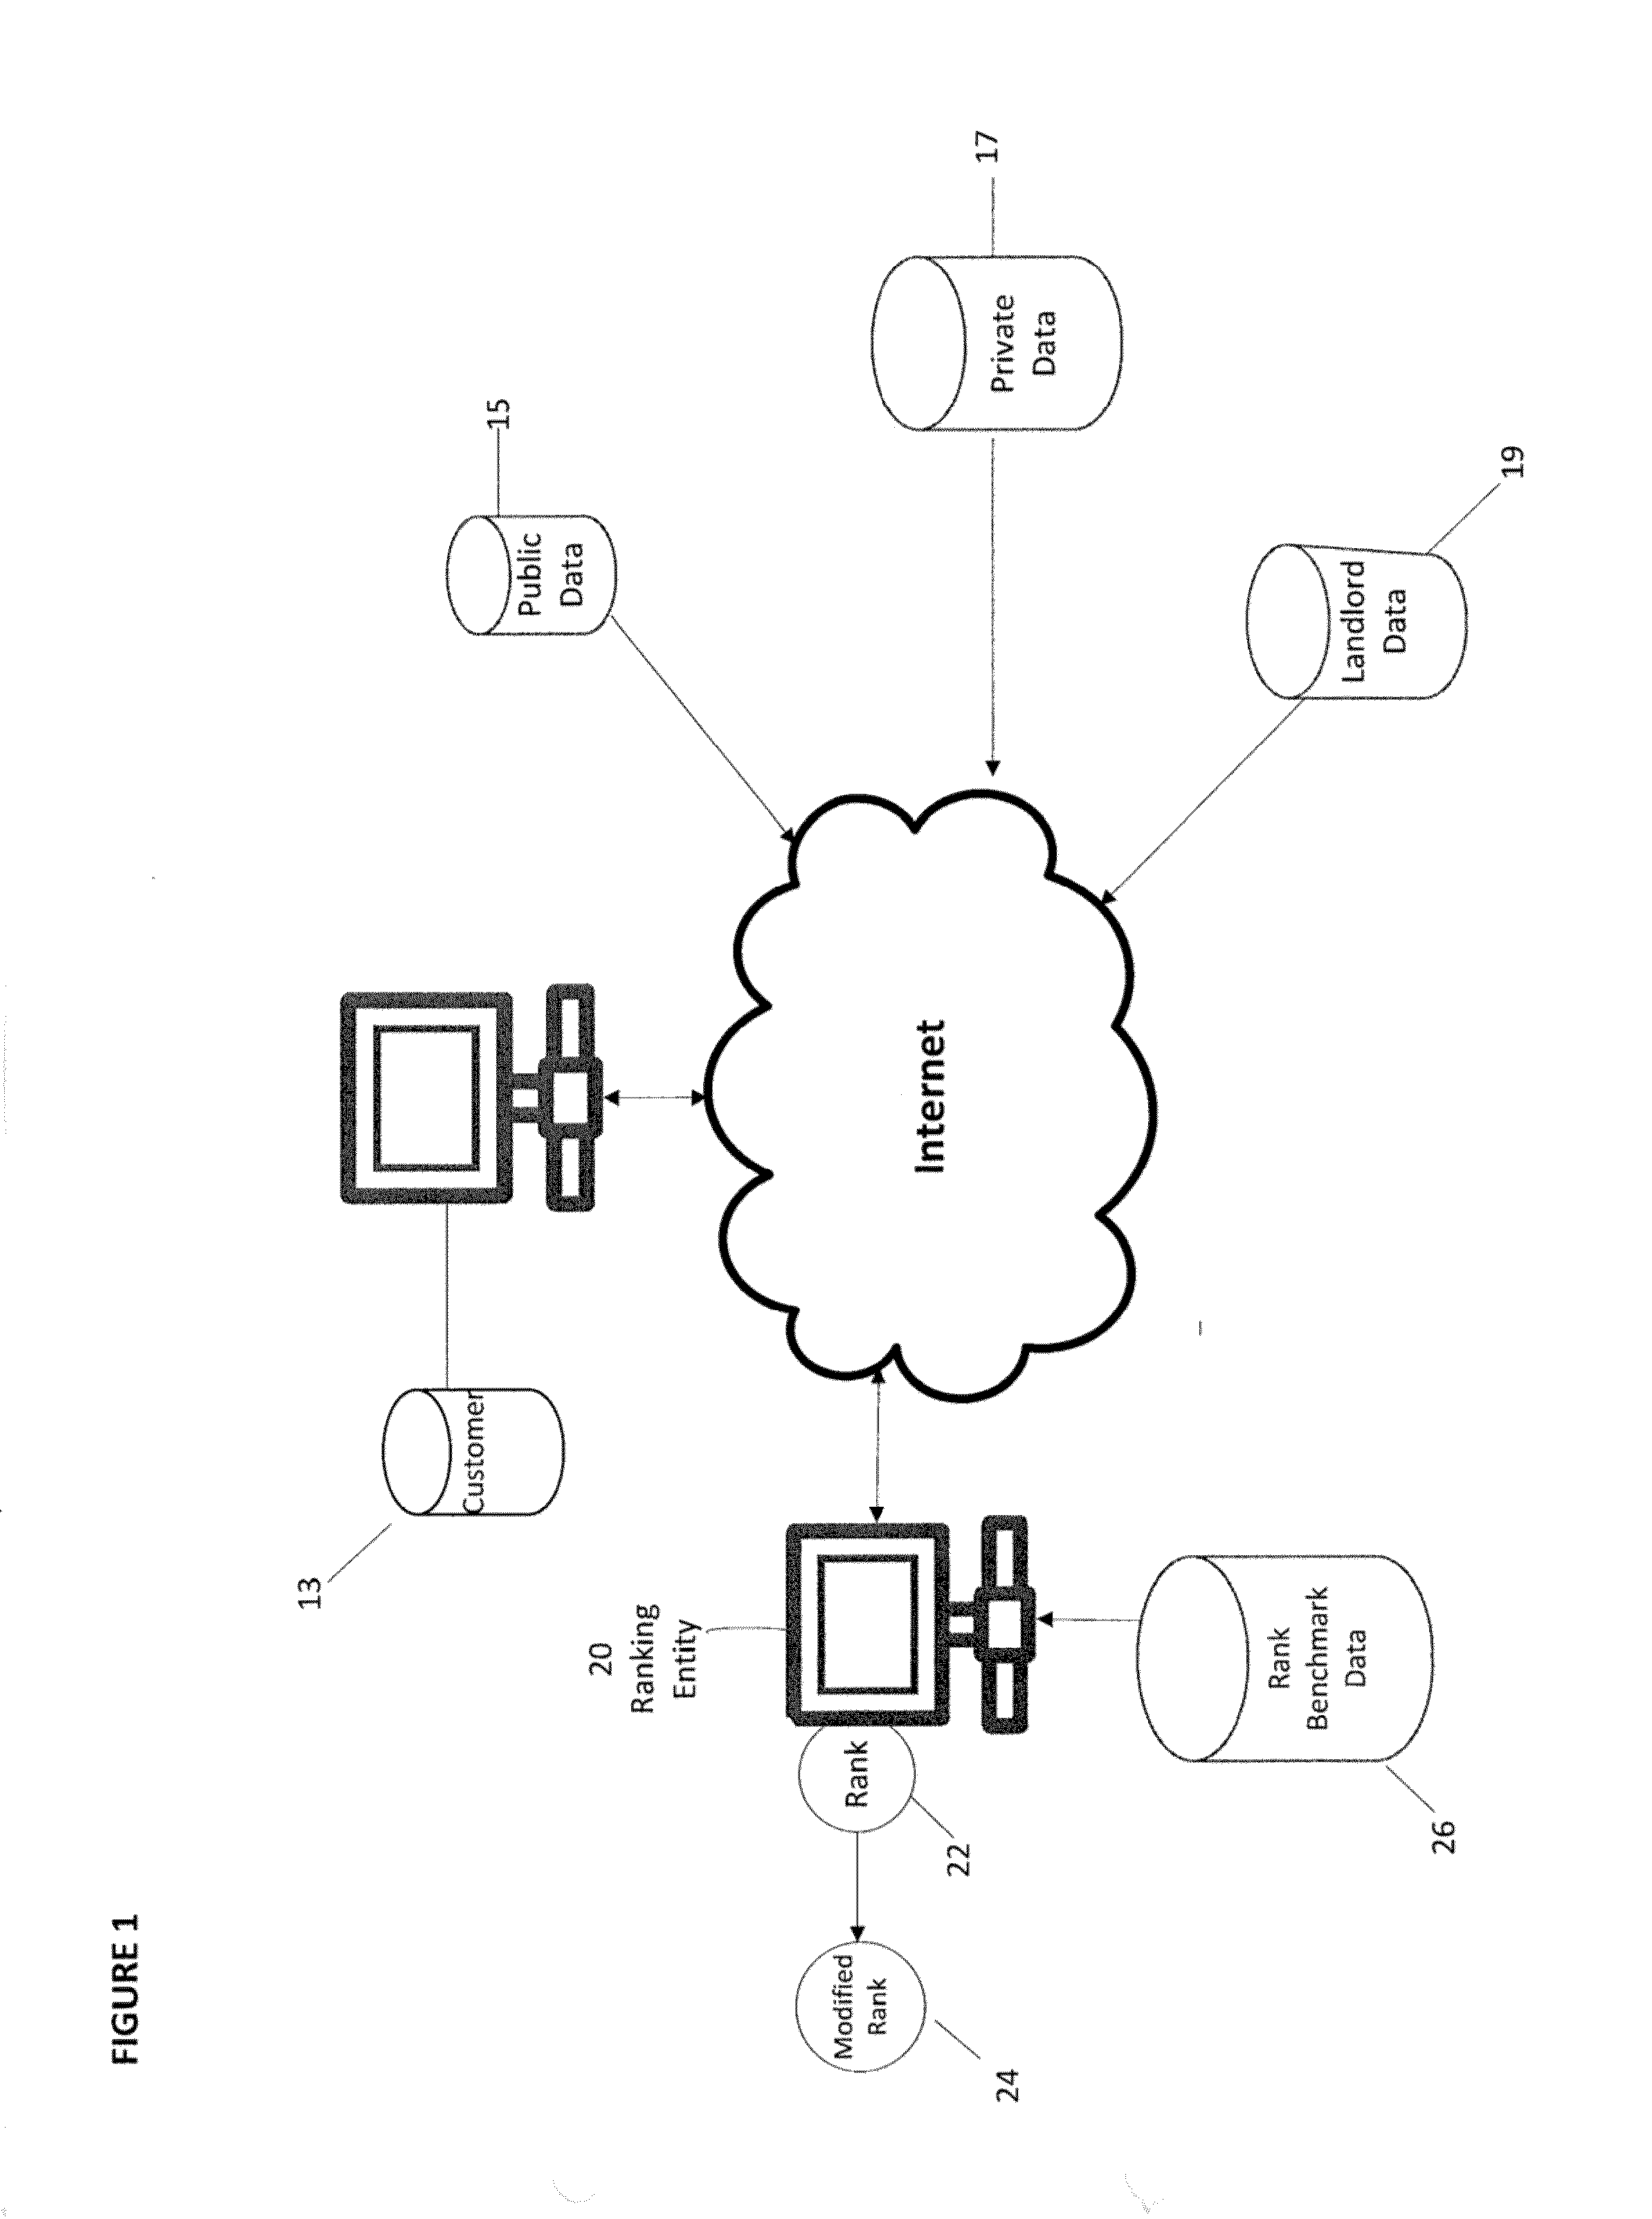 Method for weighting a credit score and display of business score